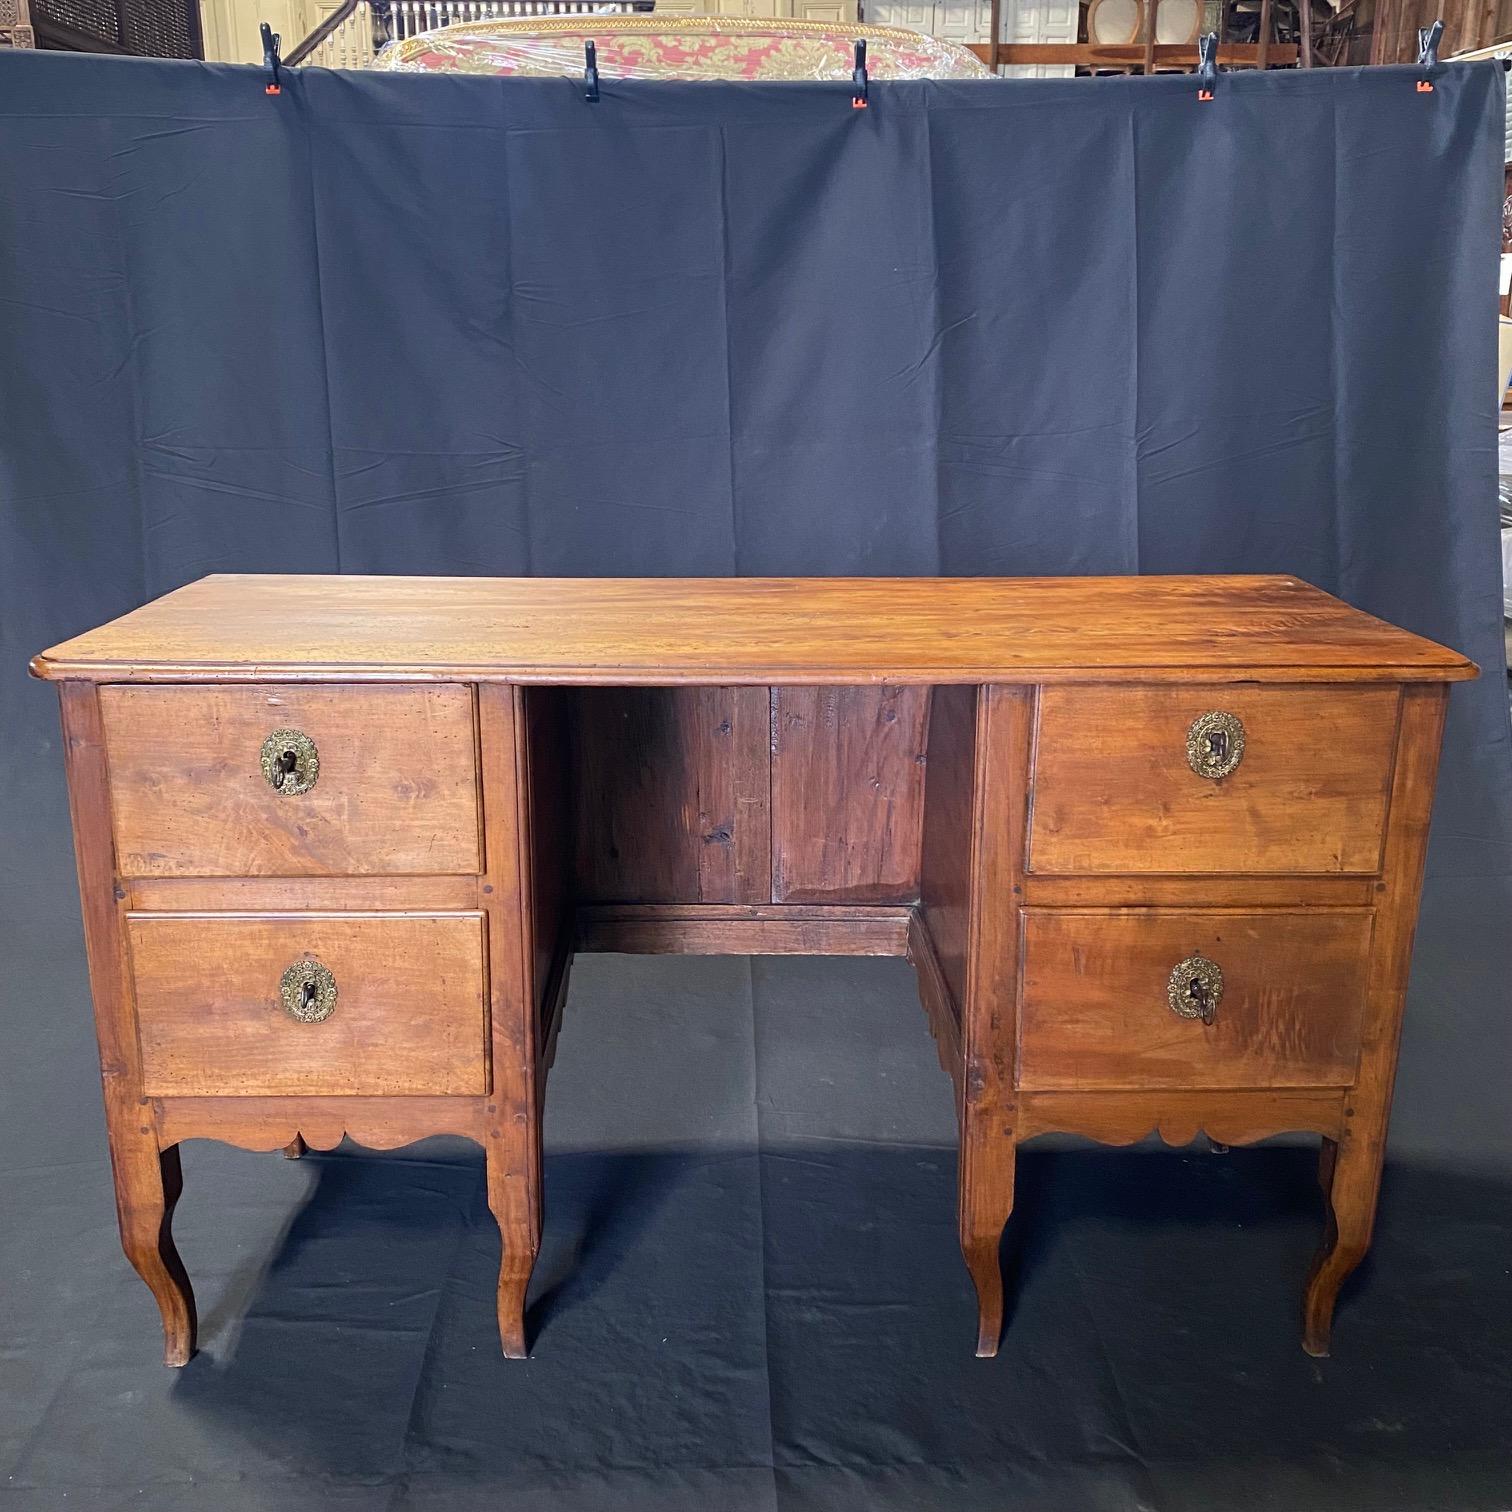 Found near Paris, France, we purchased this museum quality 18th century Empire style desk for its impeccable quality and style. Made predominantly from walnut and featuring Empiric style lines and columnal tapered legs, this piece is perfect for any